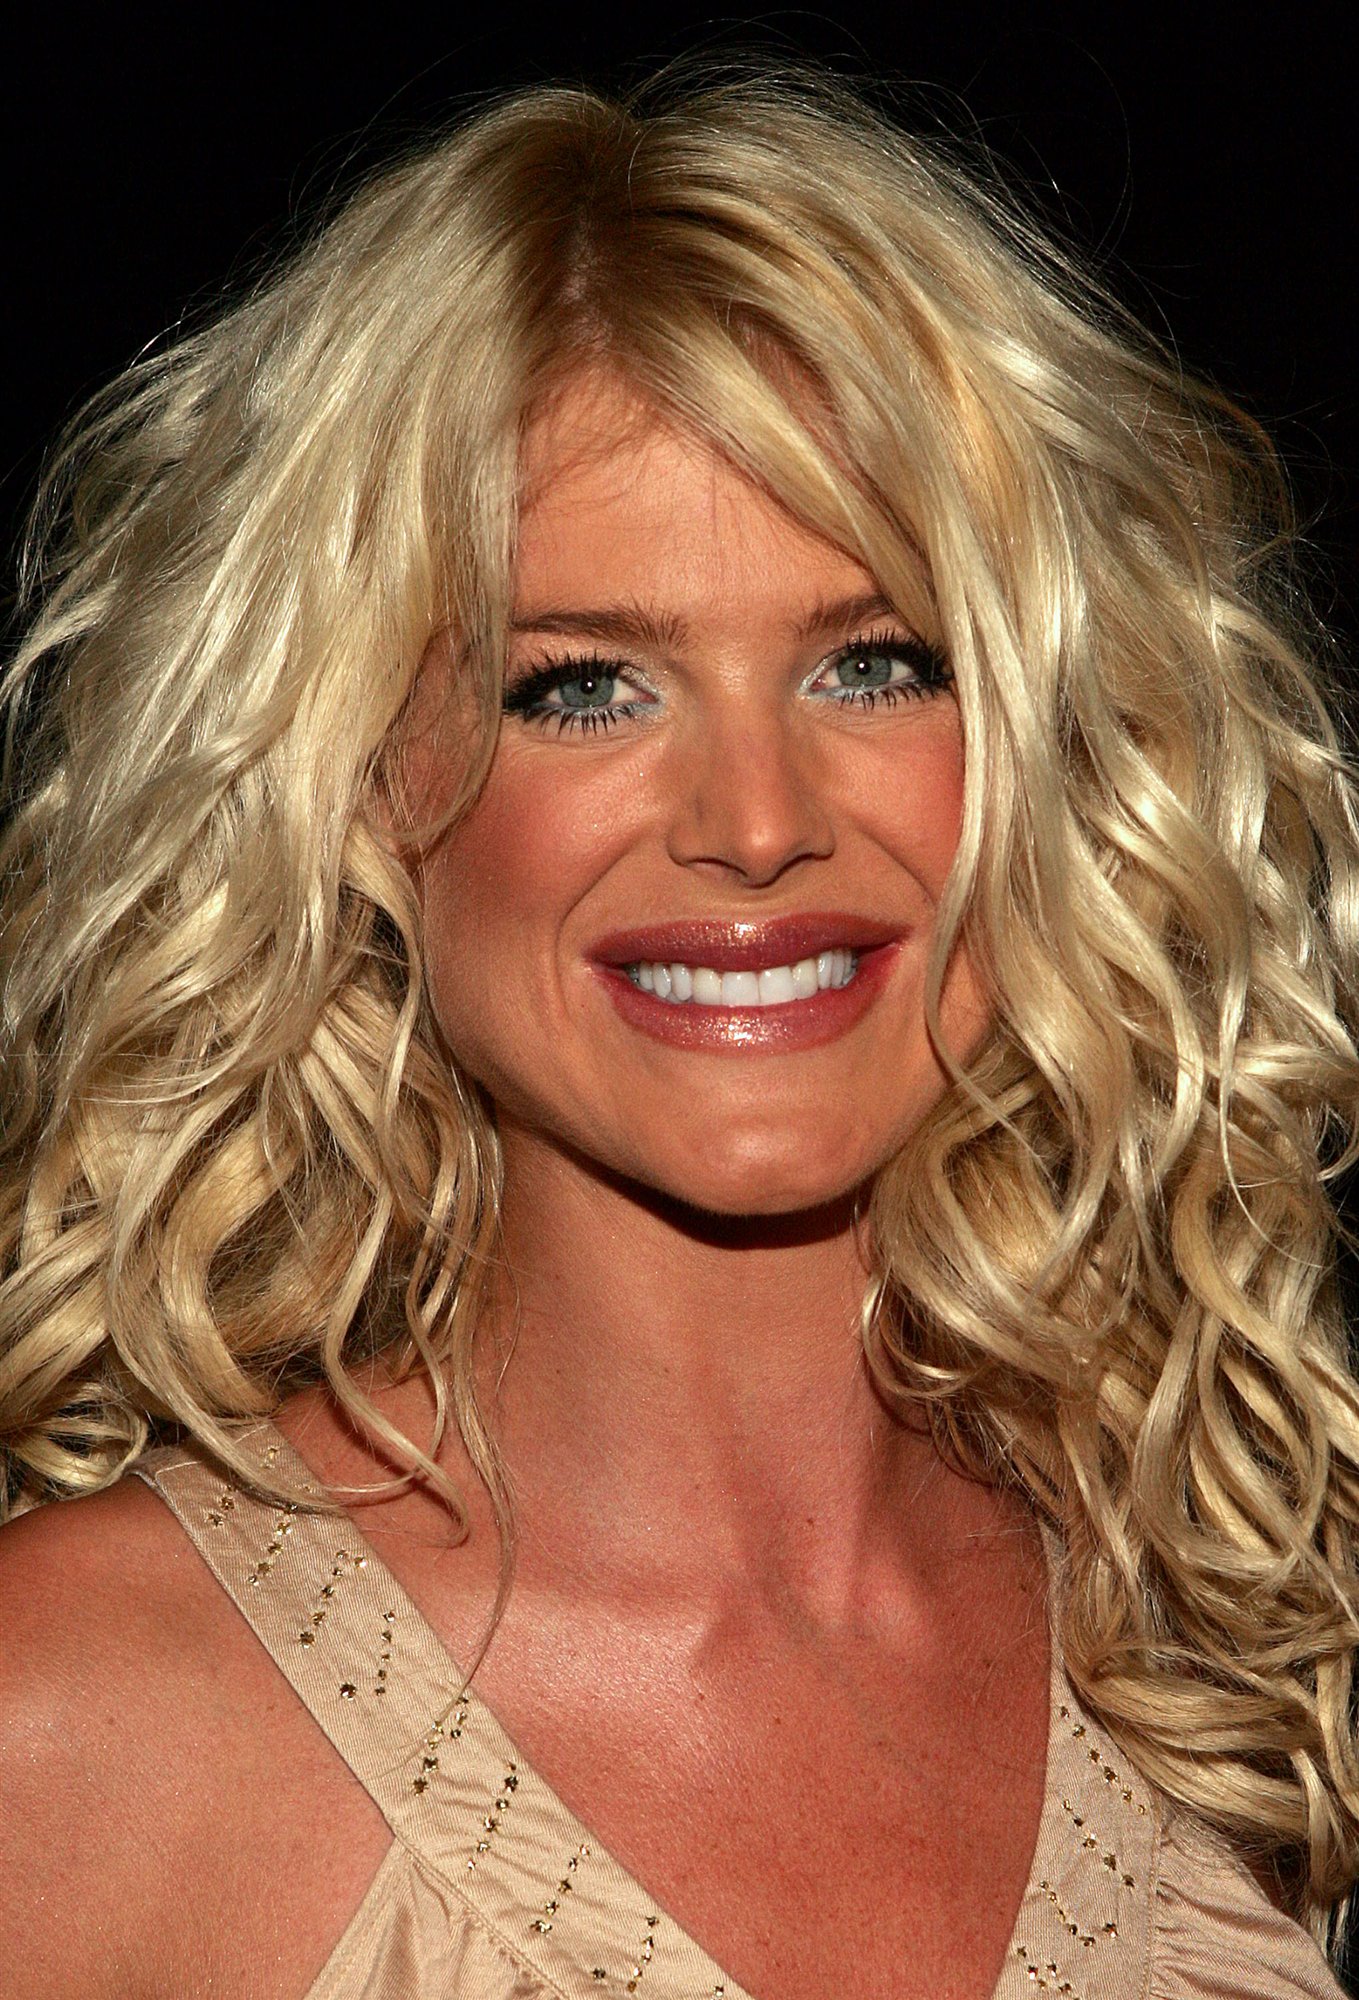 Victoria Silvstedt leaked wallpapers